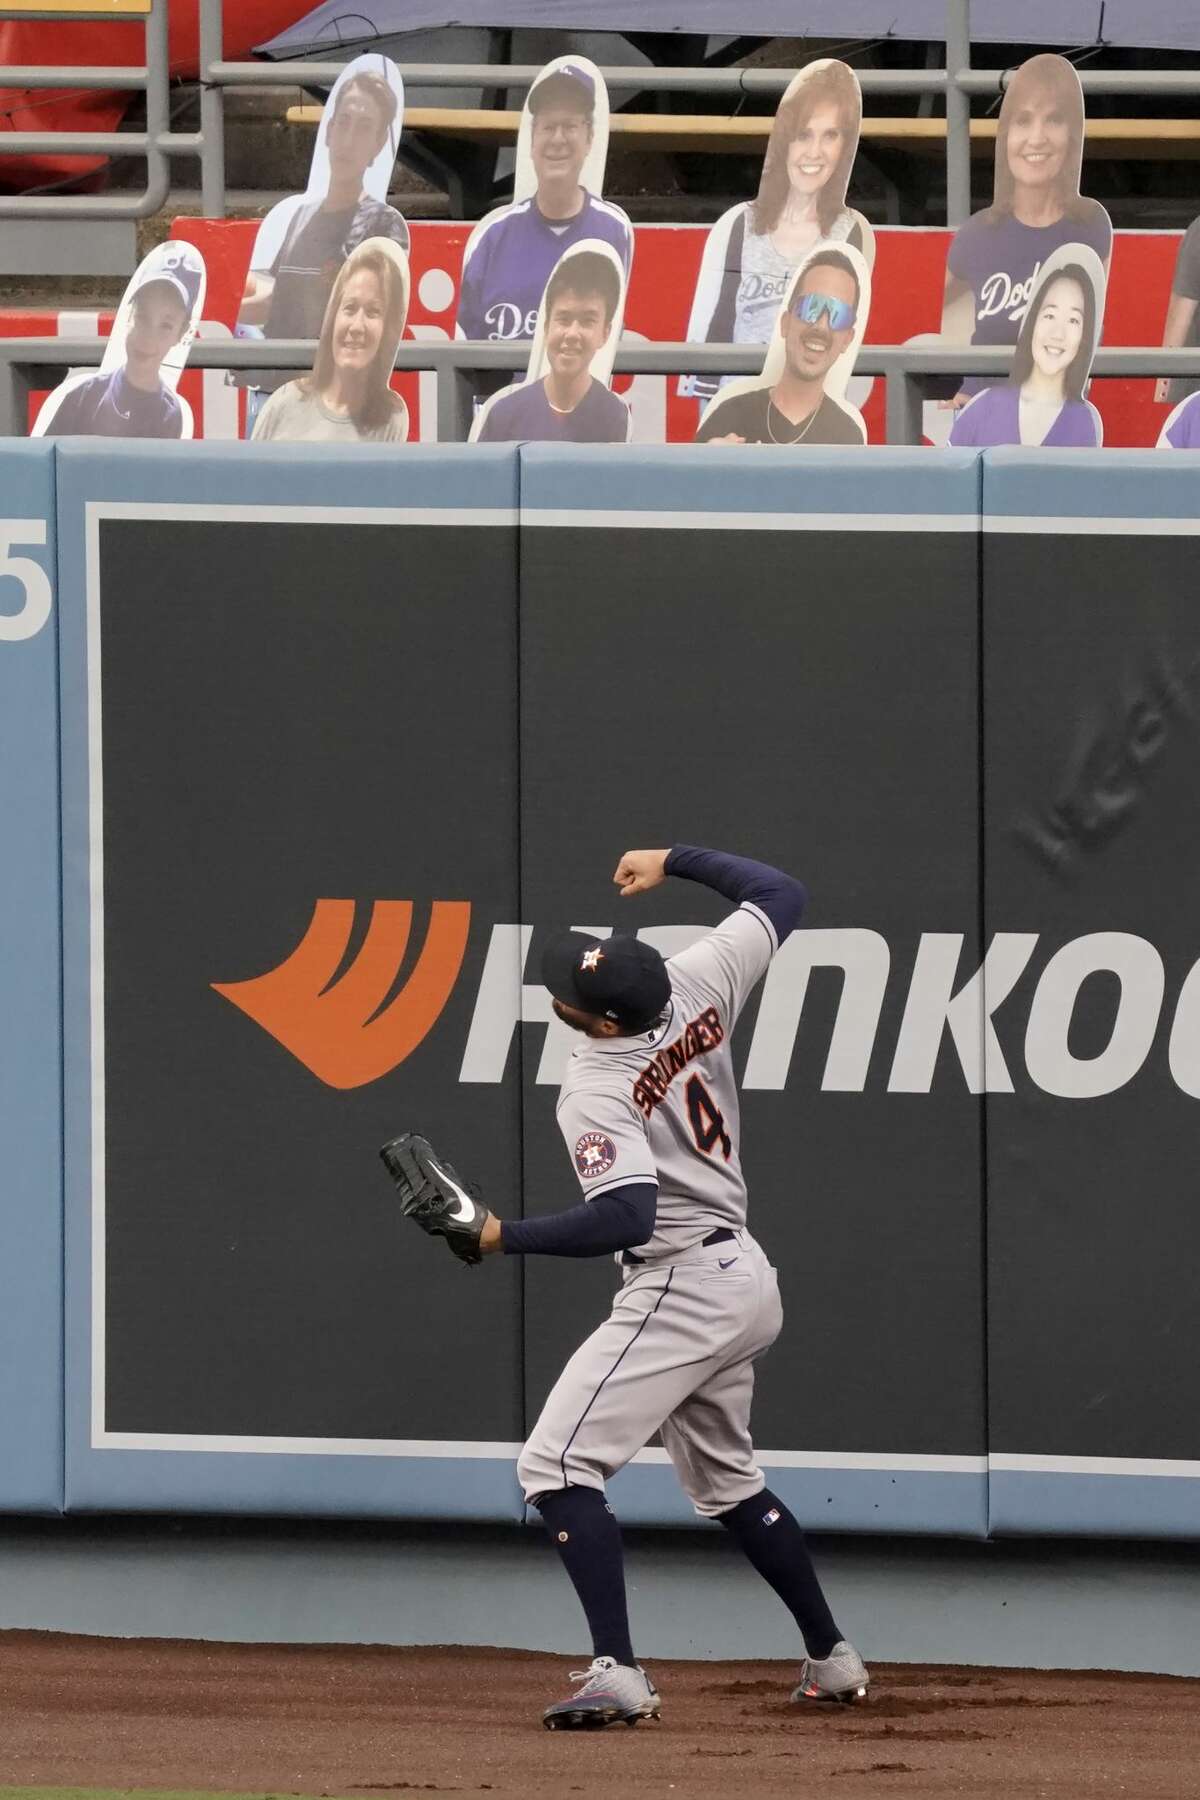 Houston Astros right fielder George Springer reacts as he misses the ball for a two-run home run by Los Angeles Dodgers' Mookie Betts during the fifth inning of a baseball game in Los Angeles, Sunday, Sept. 13, 2020. (AP Photo/Alex Gallardo)